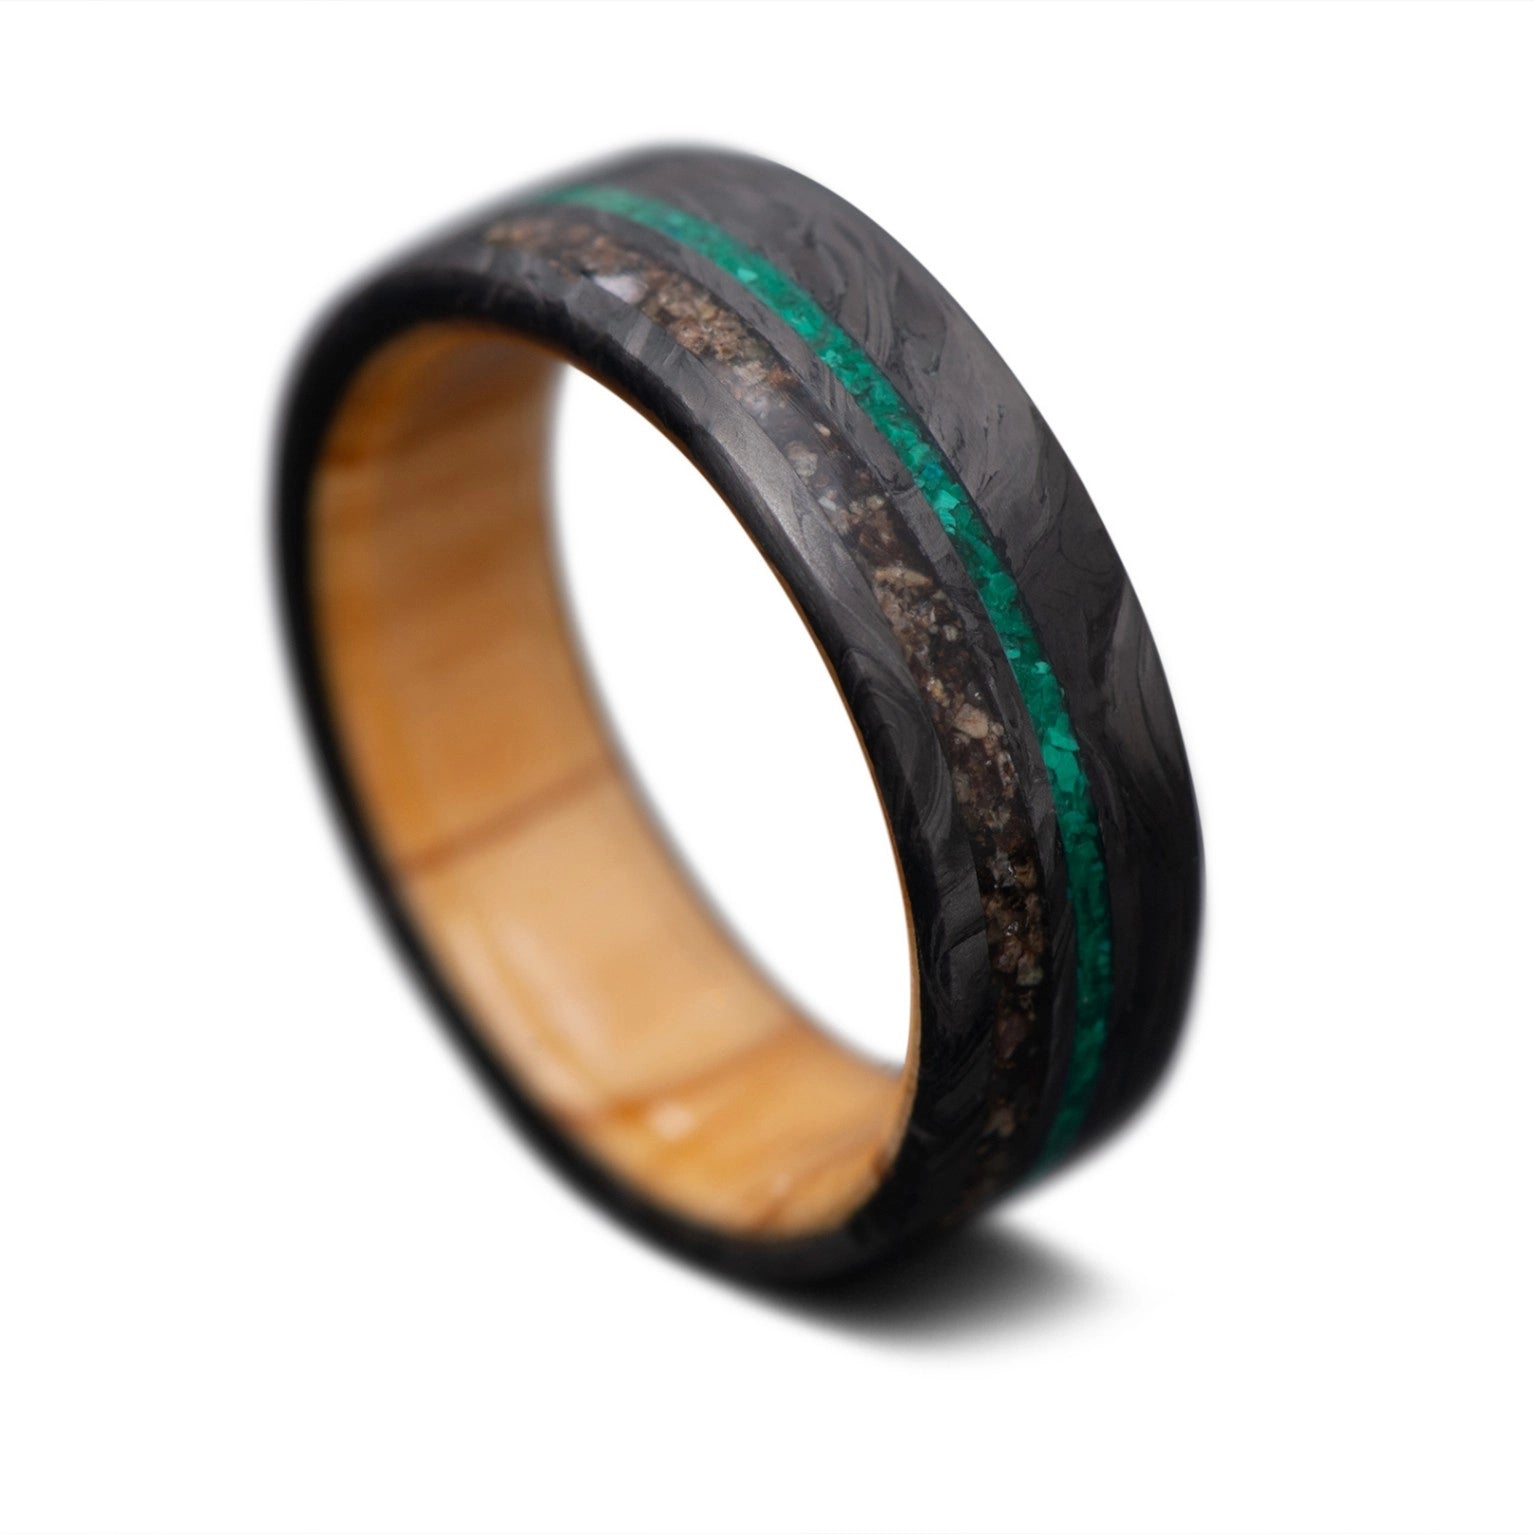 CarbonForged Core Ring with Crushed T-Rex, Malachite inlay and Olivewood inner sleeve, 7mm -THE ODYSSEY